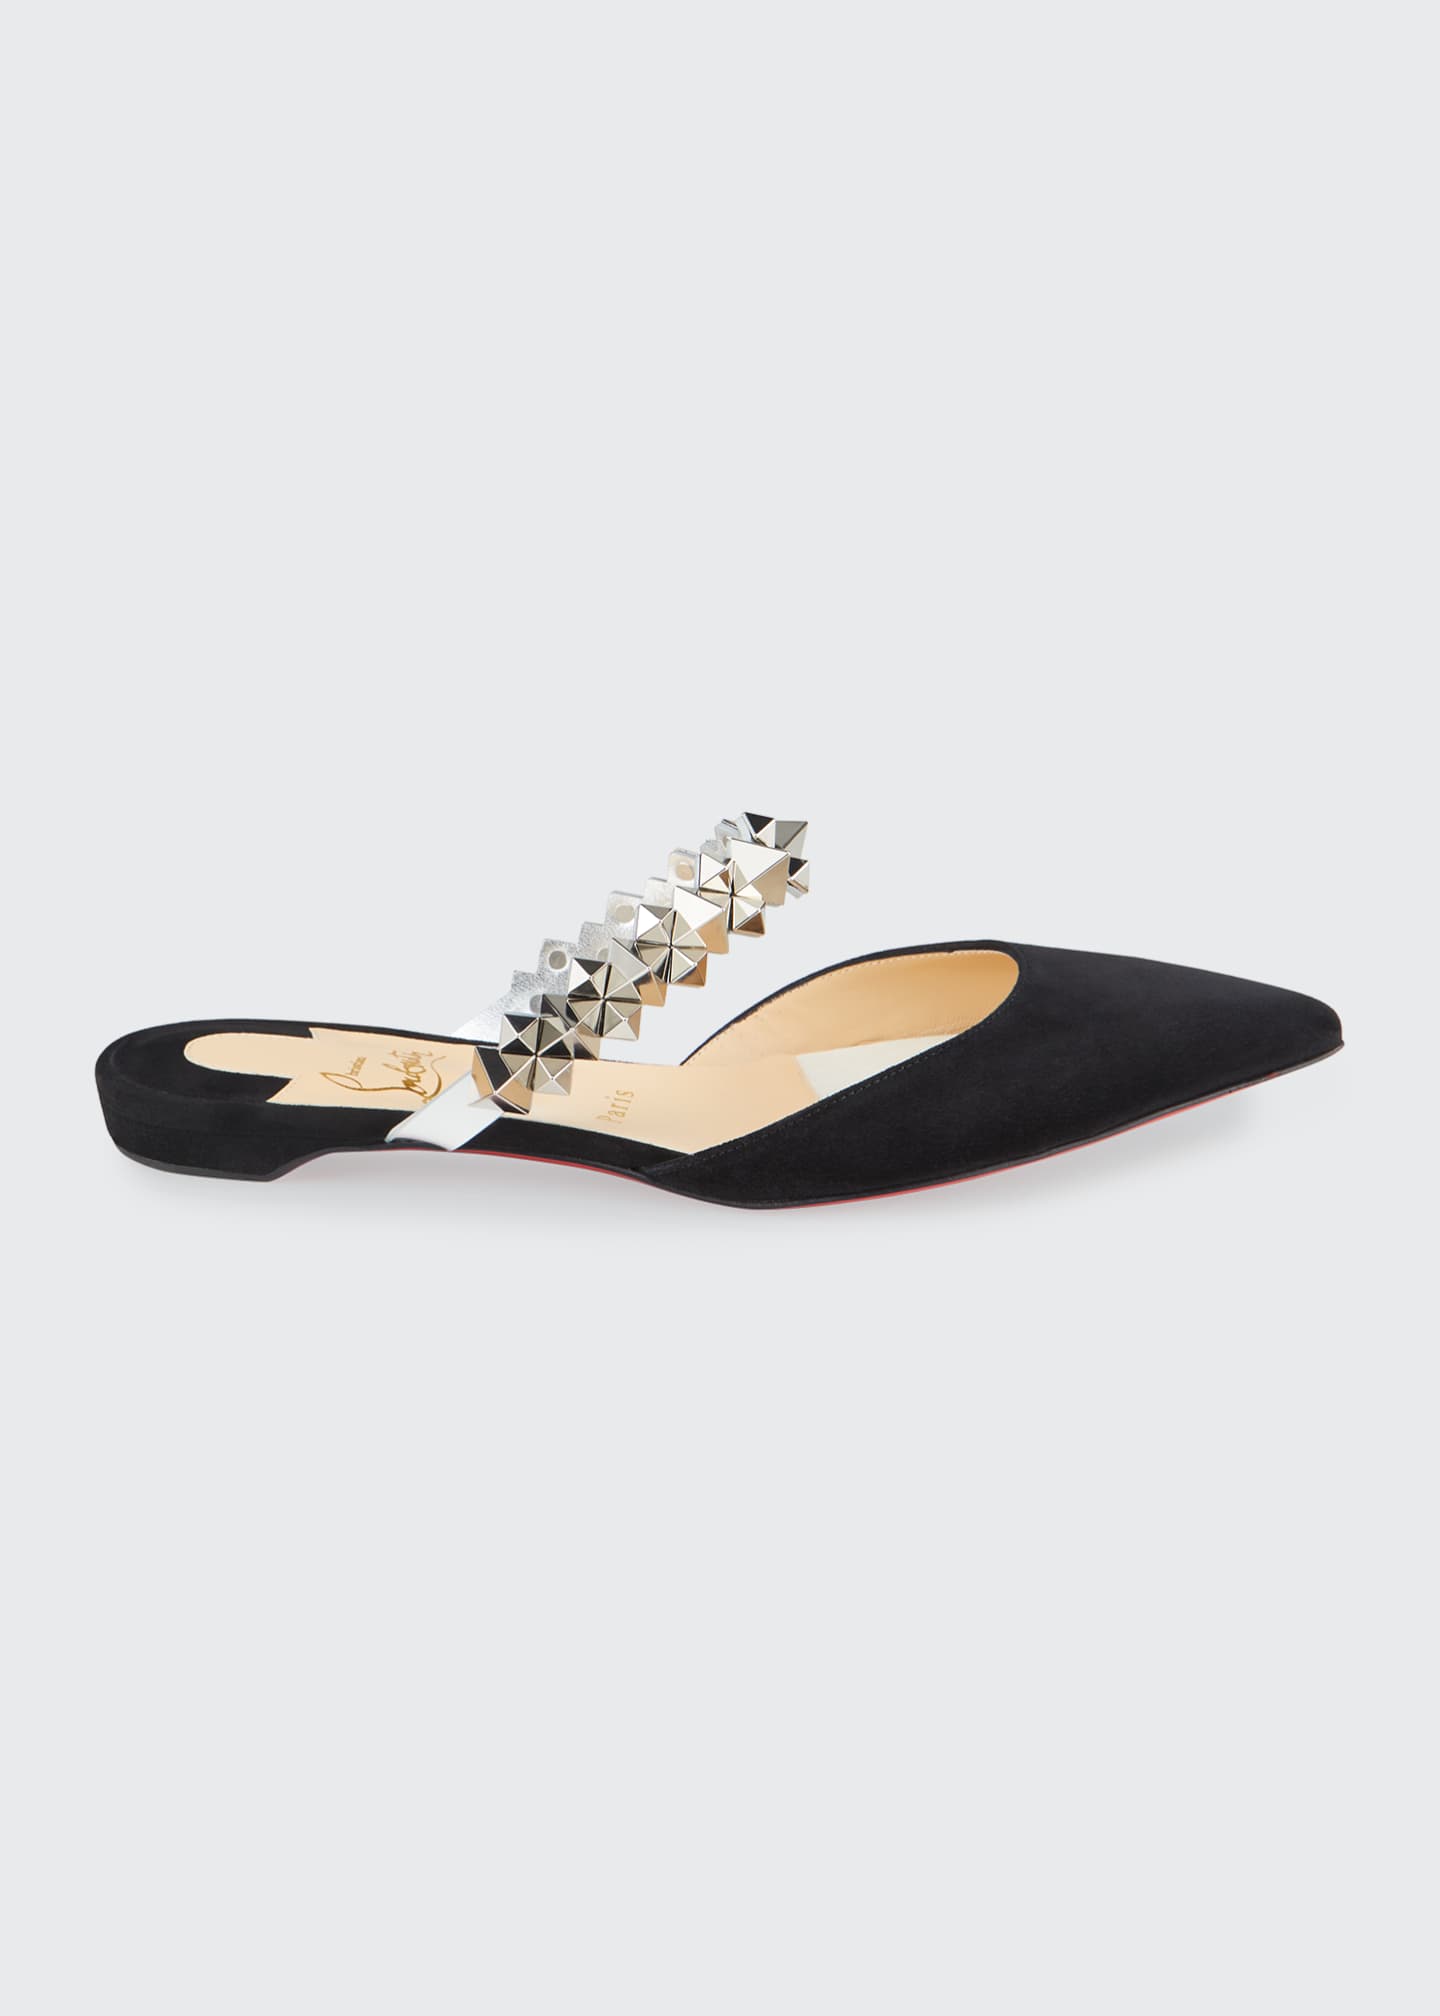 Christian Louboutin Planet Choc Suede Spike-Strap Red Sole Mules ...